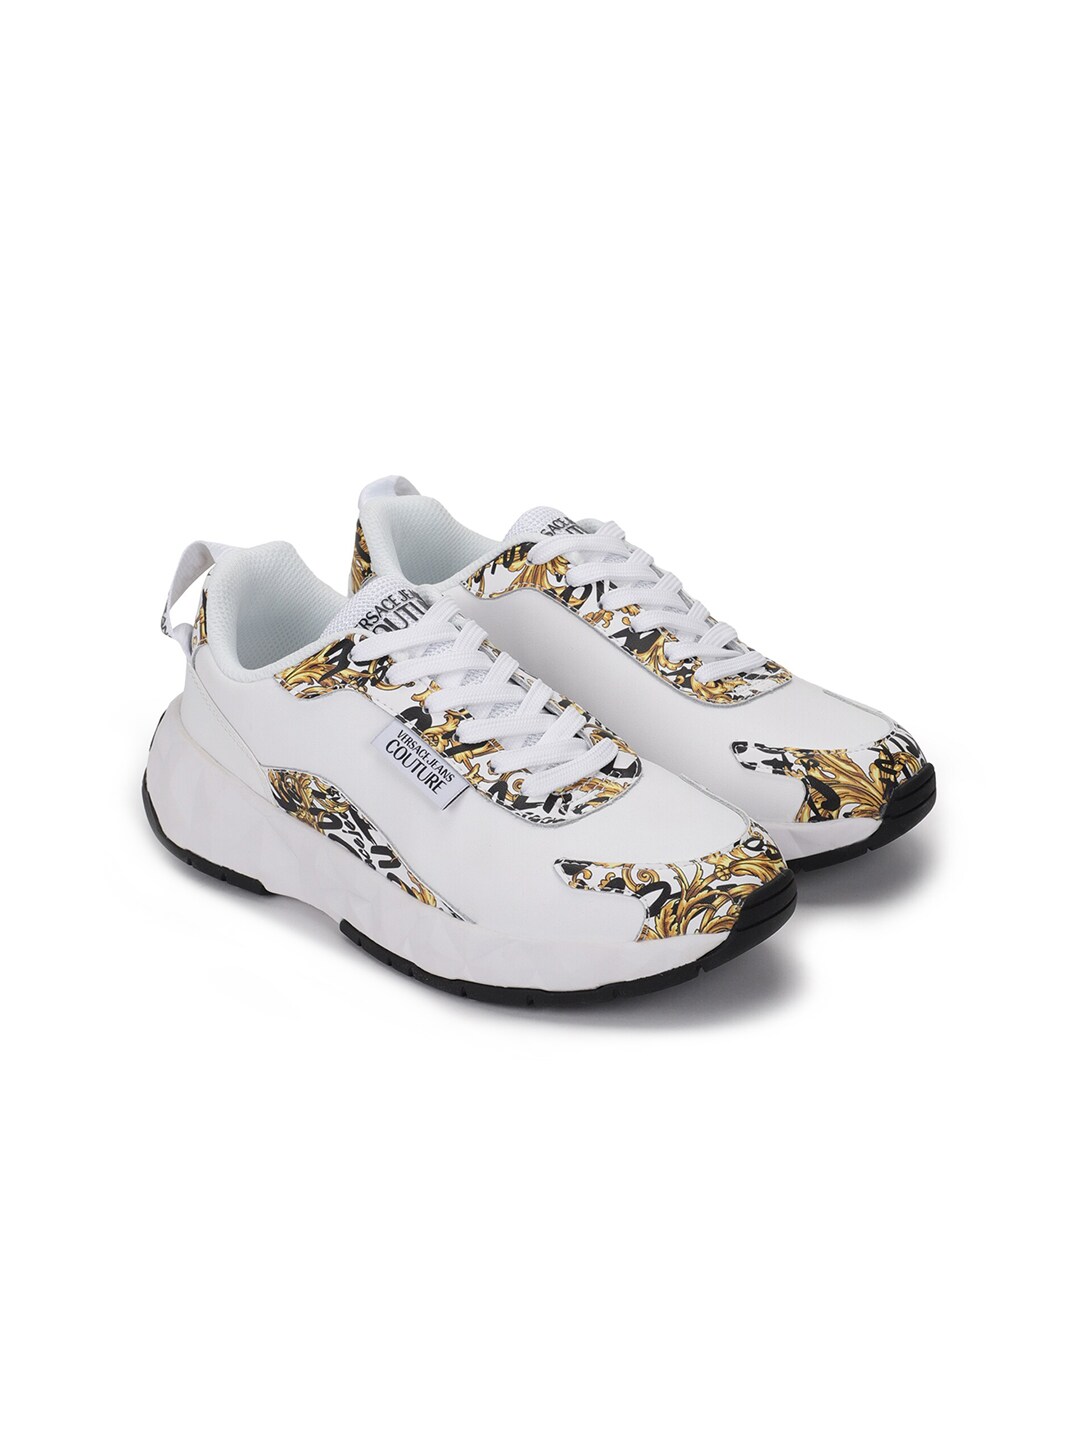 Versace Jeans Couture Women White Printed Leather Sneakers Price in India